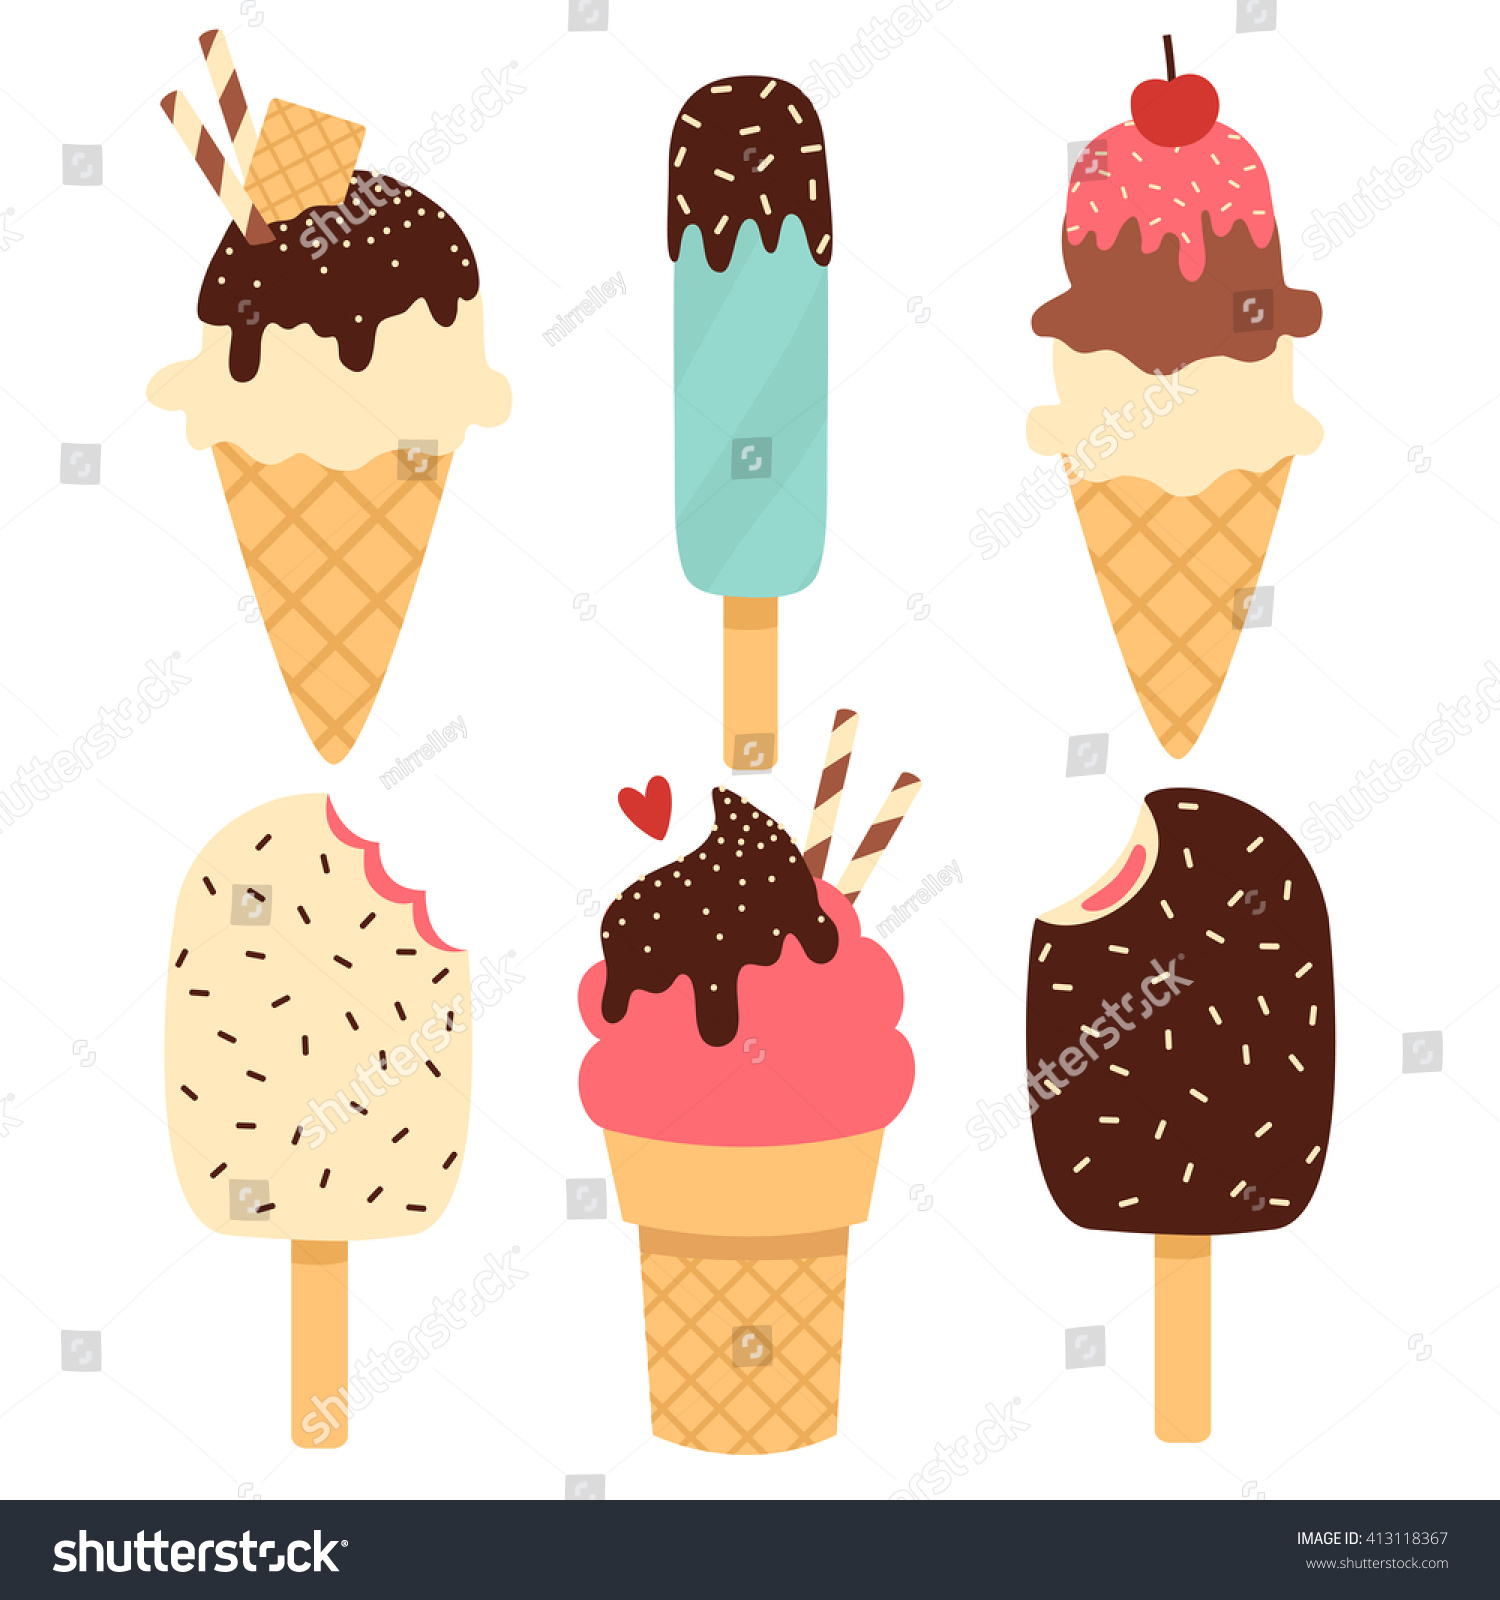 ice cream toppings clipart - photo #22